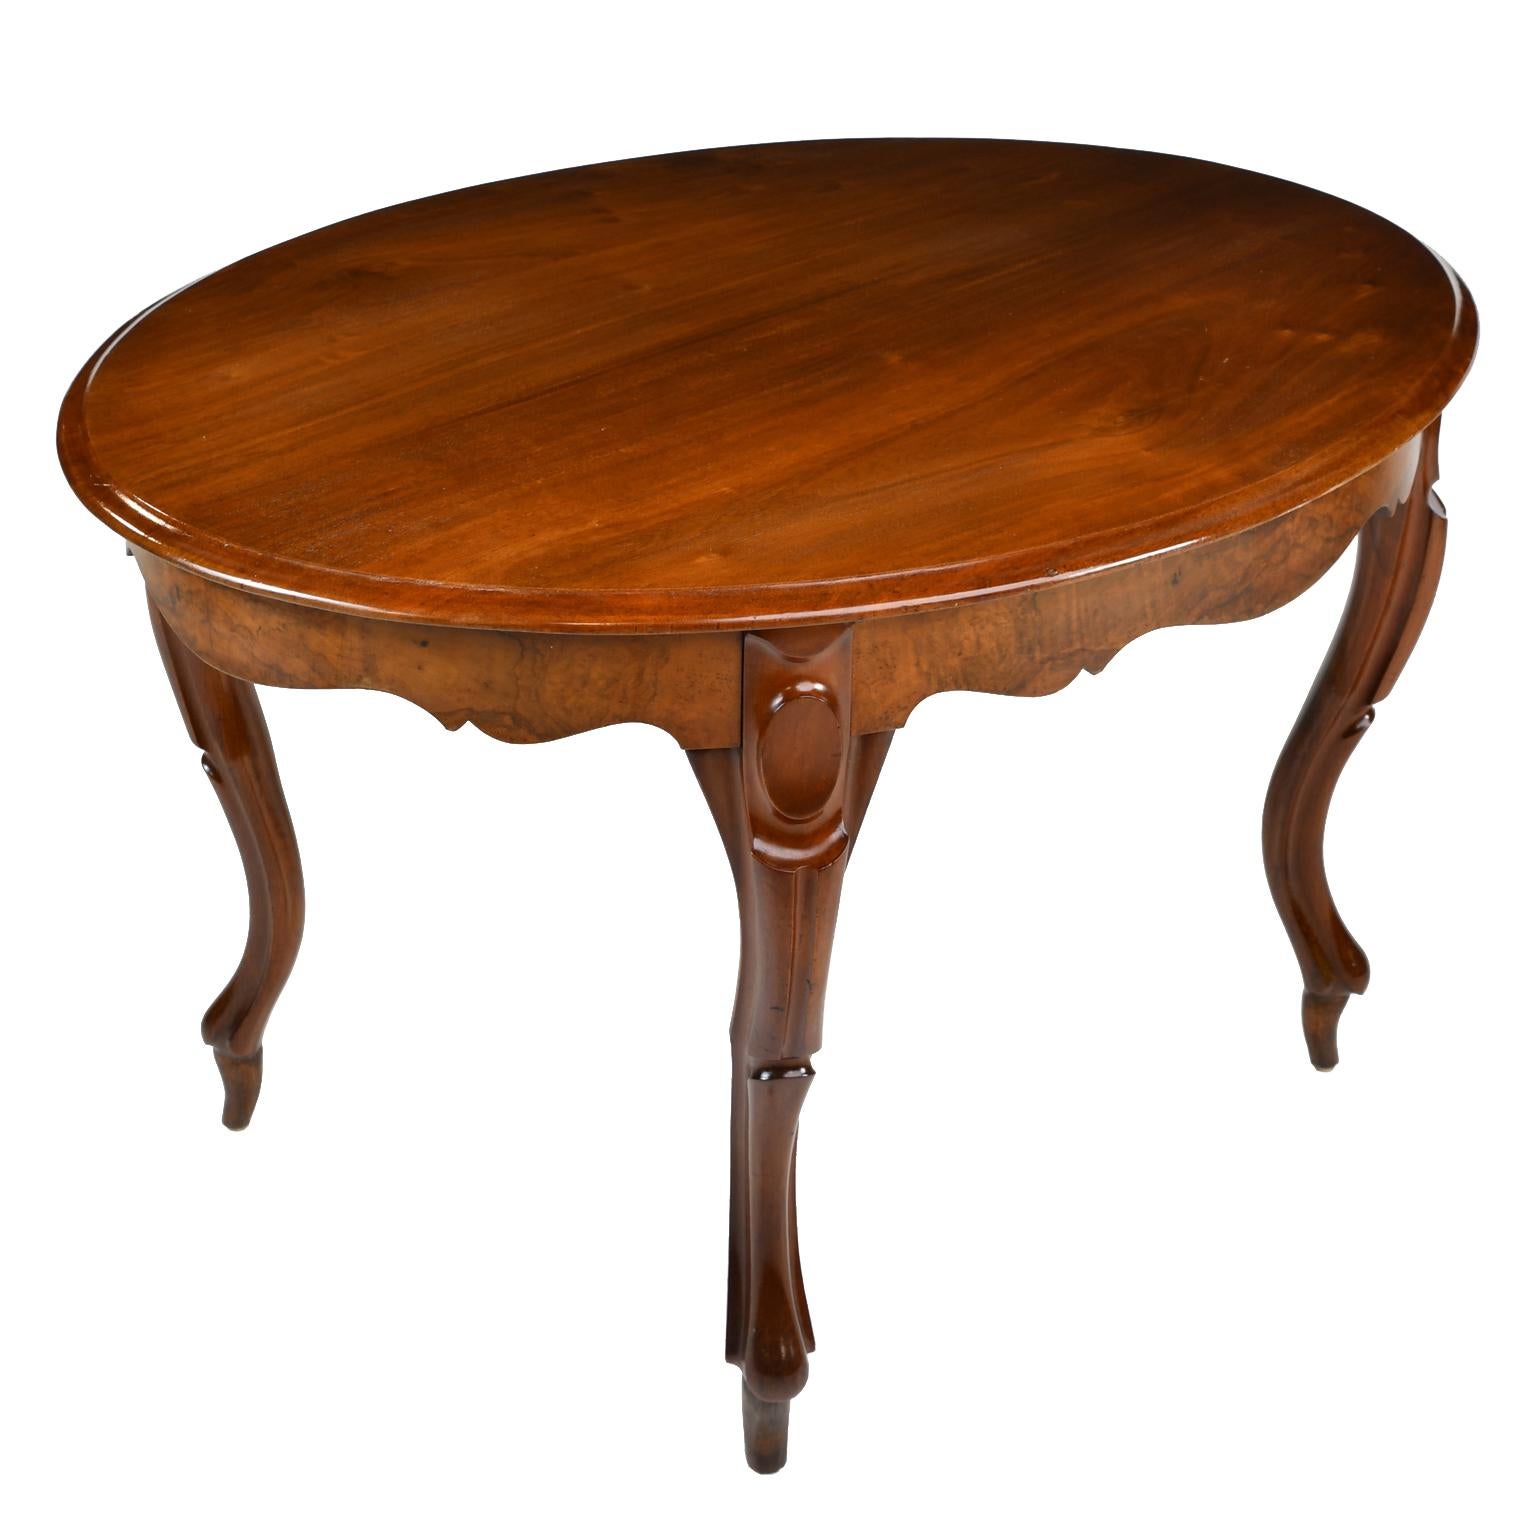 Mid-19th Century Antique French Louis Philippe Oval Dining/ Center Table in Mahogany, circa 1840 For Sale